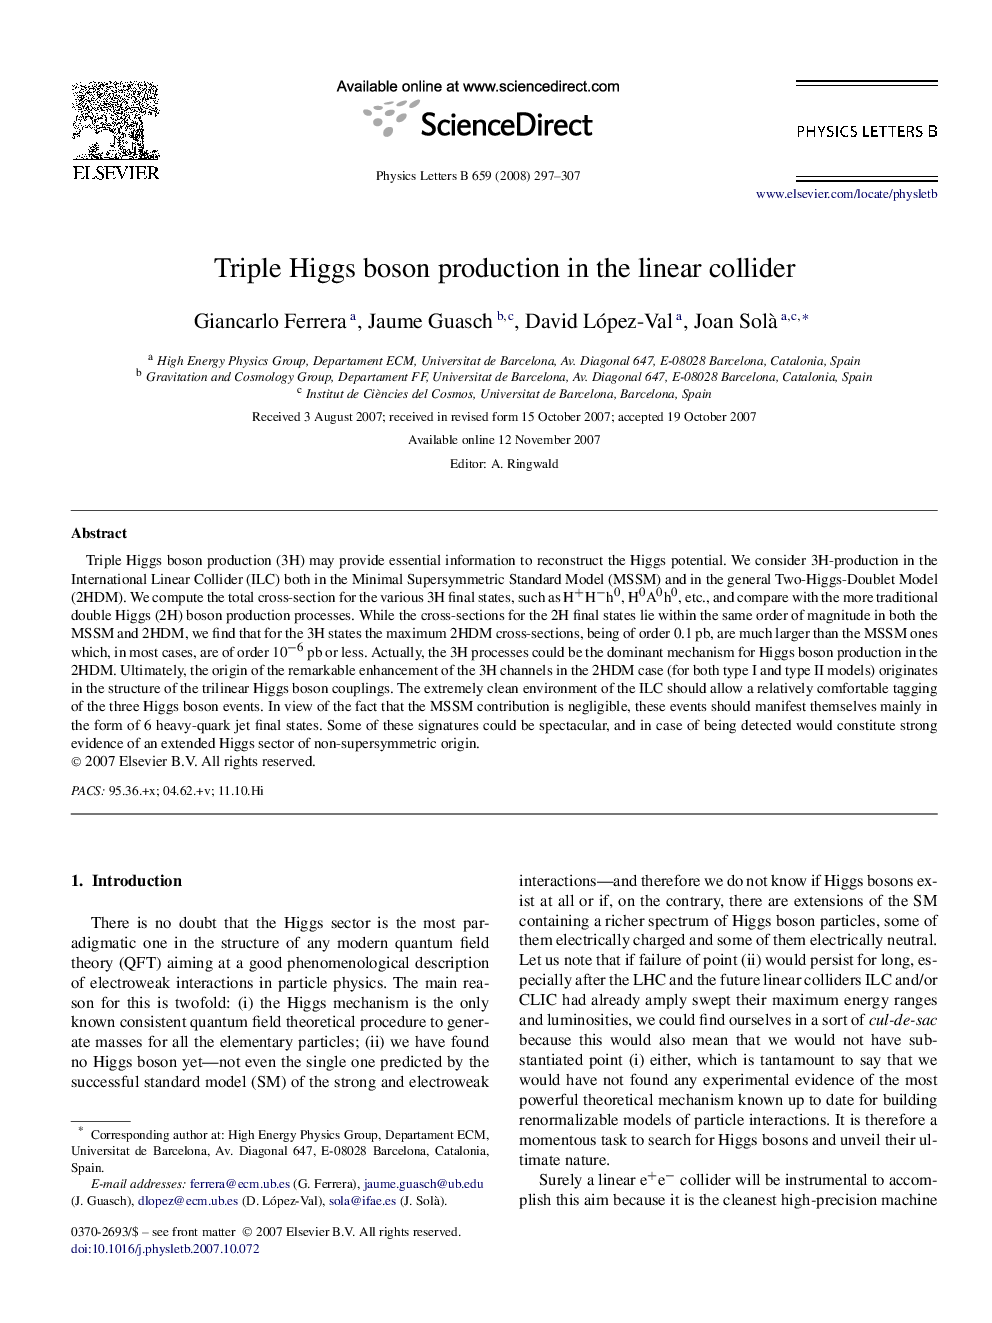 Triple Higgs boson production in the linear collider